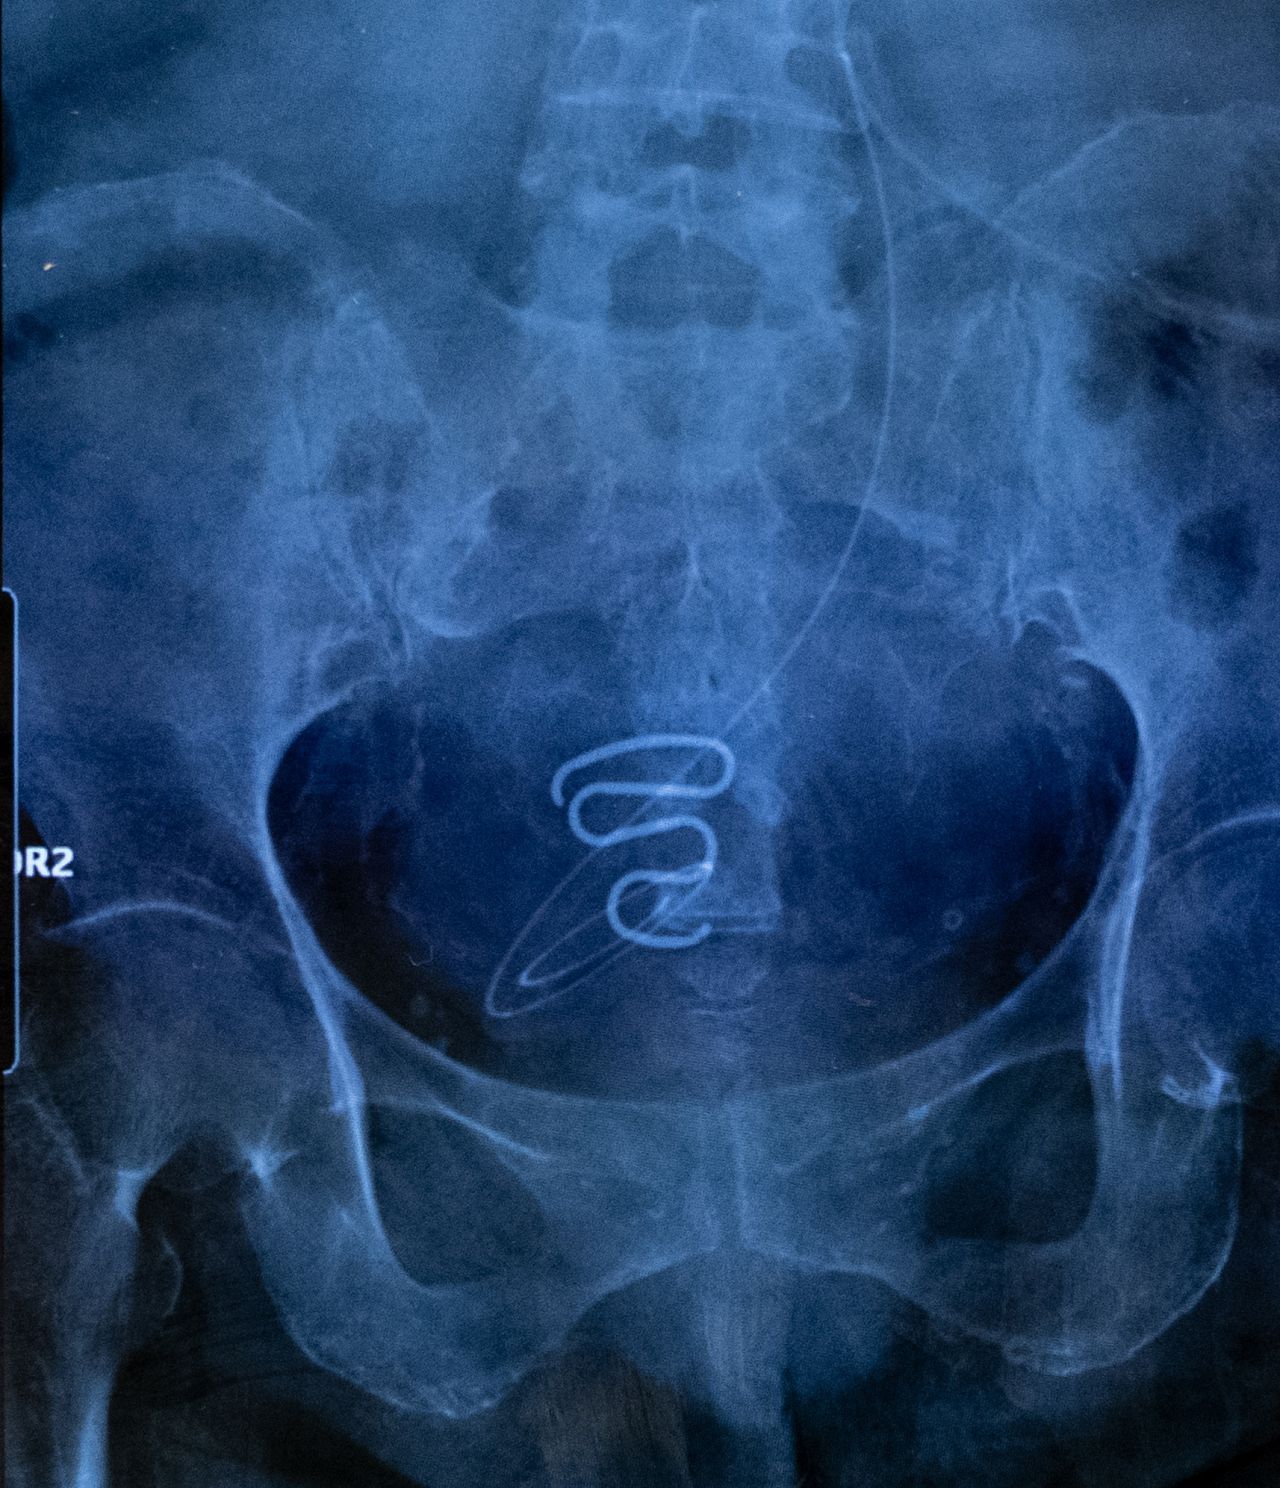 An X-ray showing an IUD or coil – commonly known as a ‘spiral’